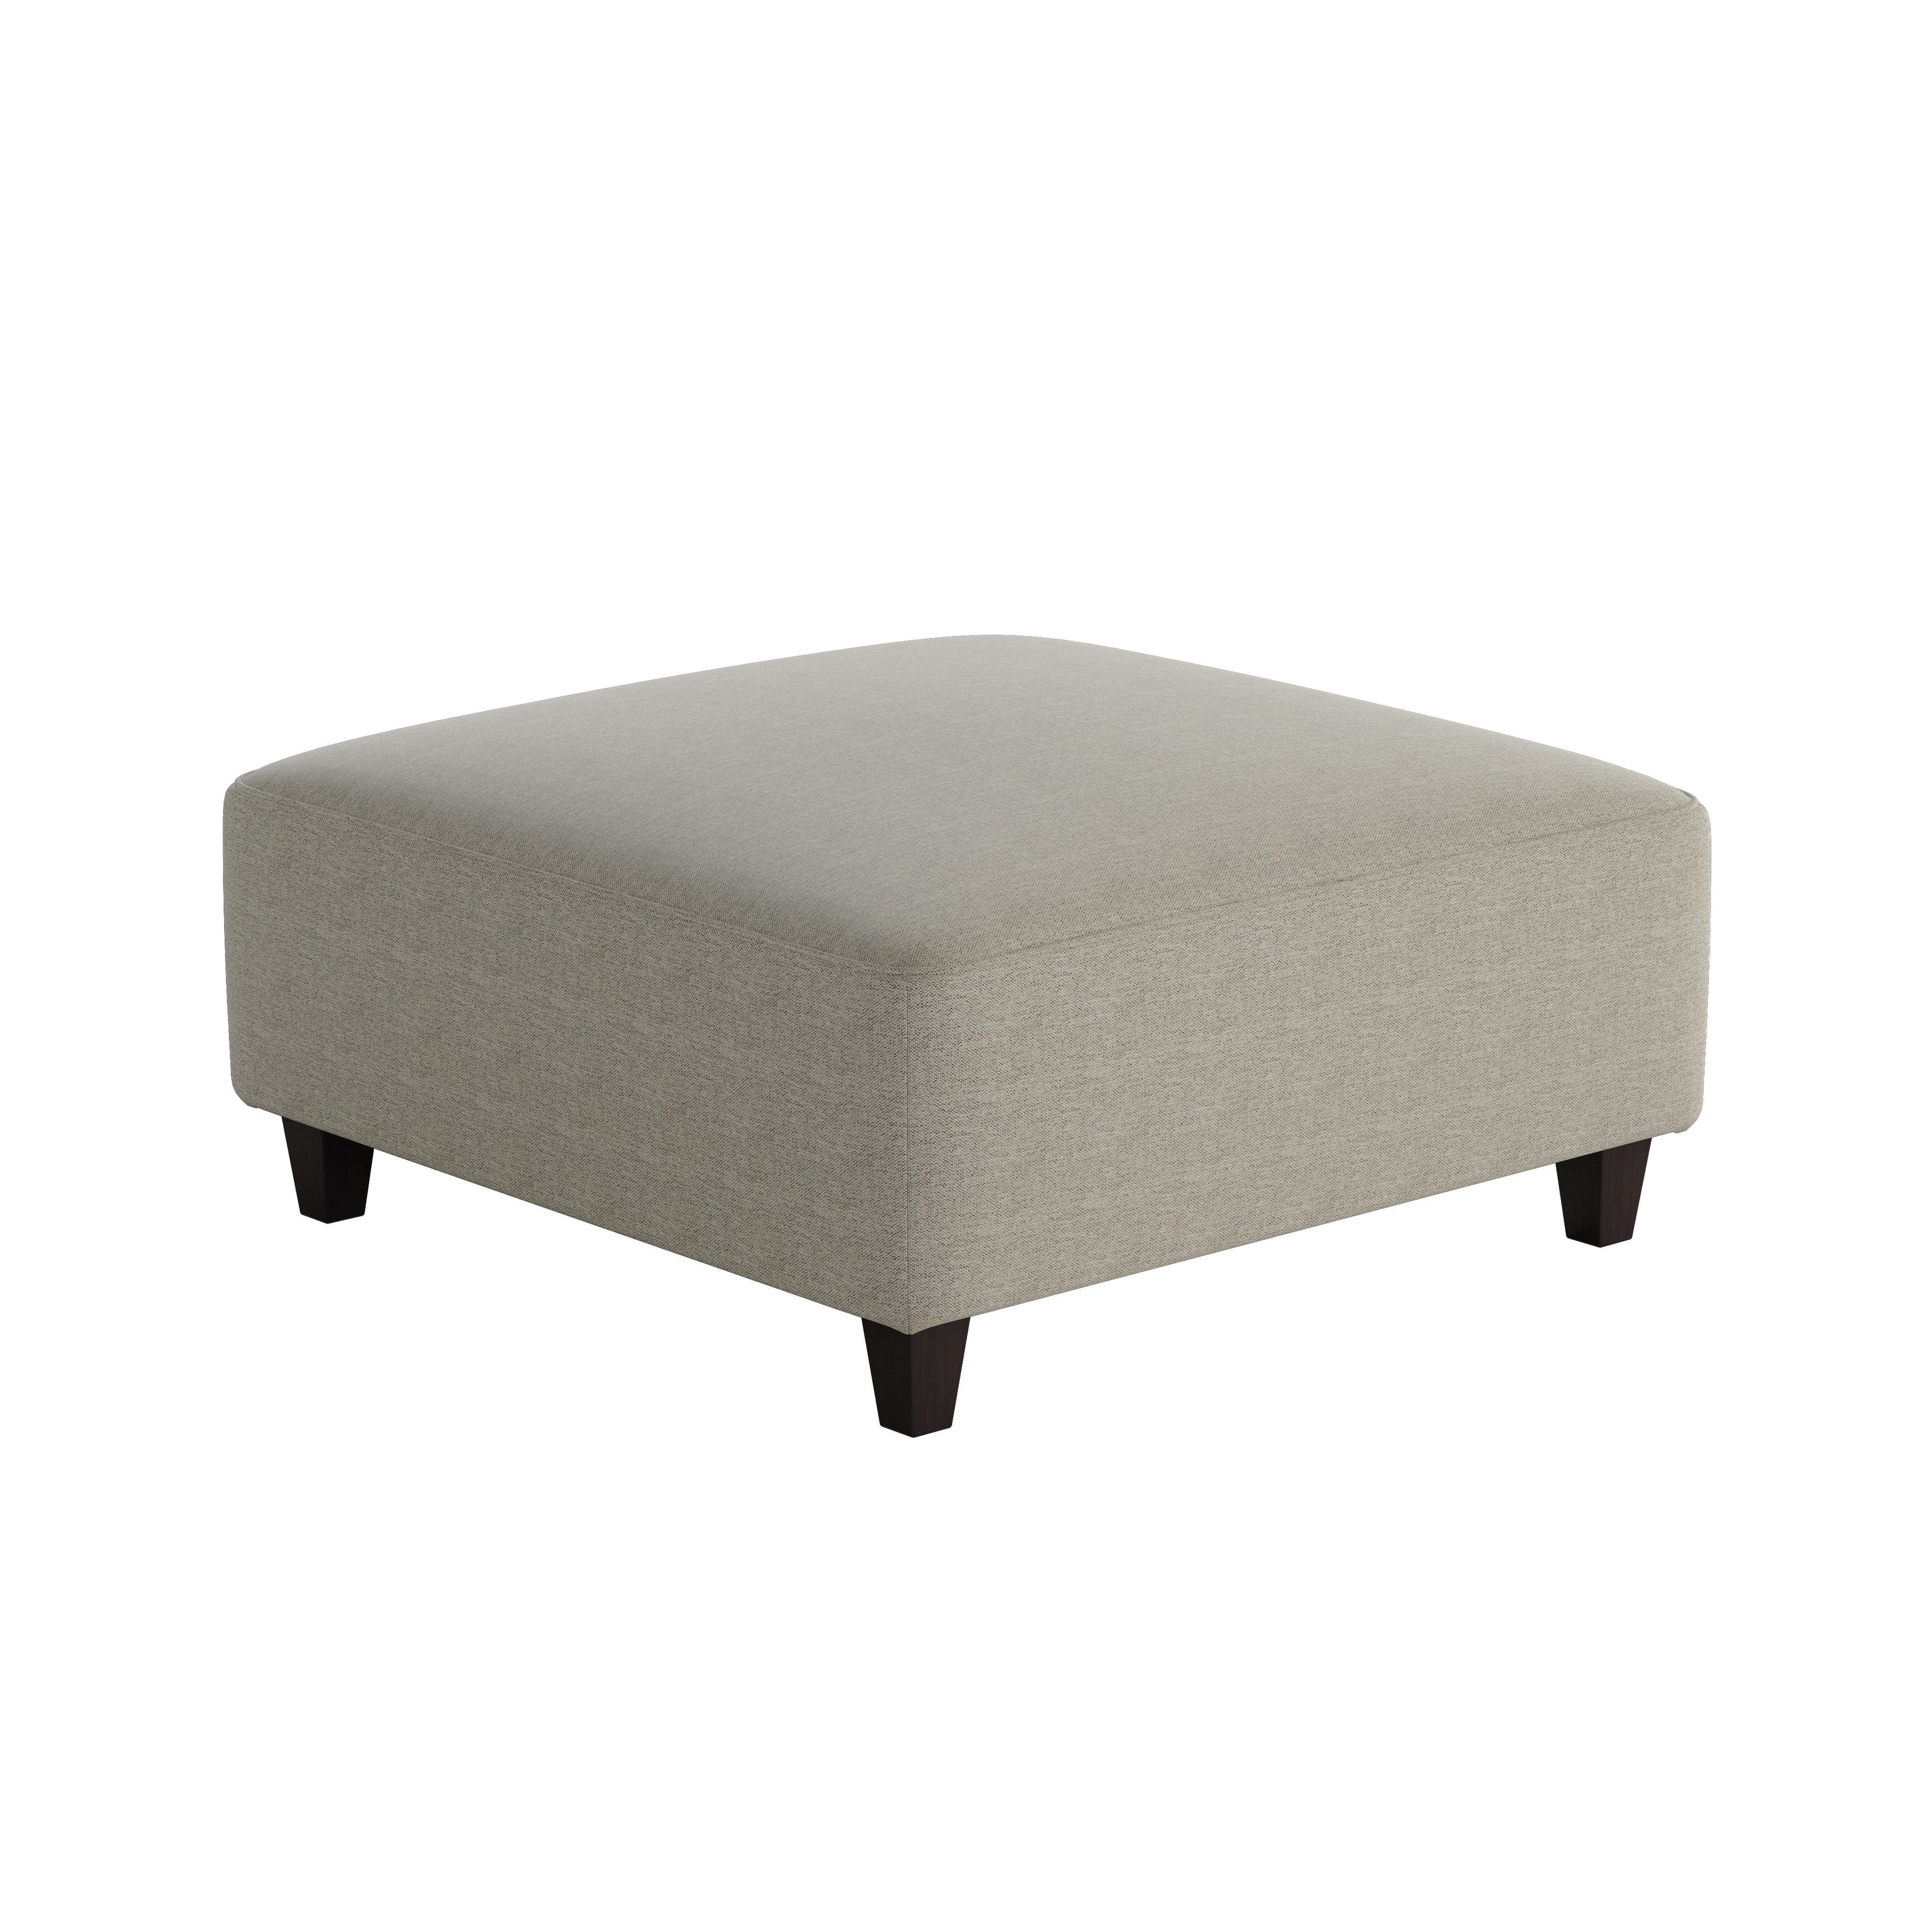 Paperchase Berber 38" Square Cocktail Ottoman